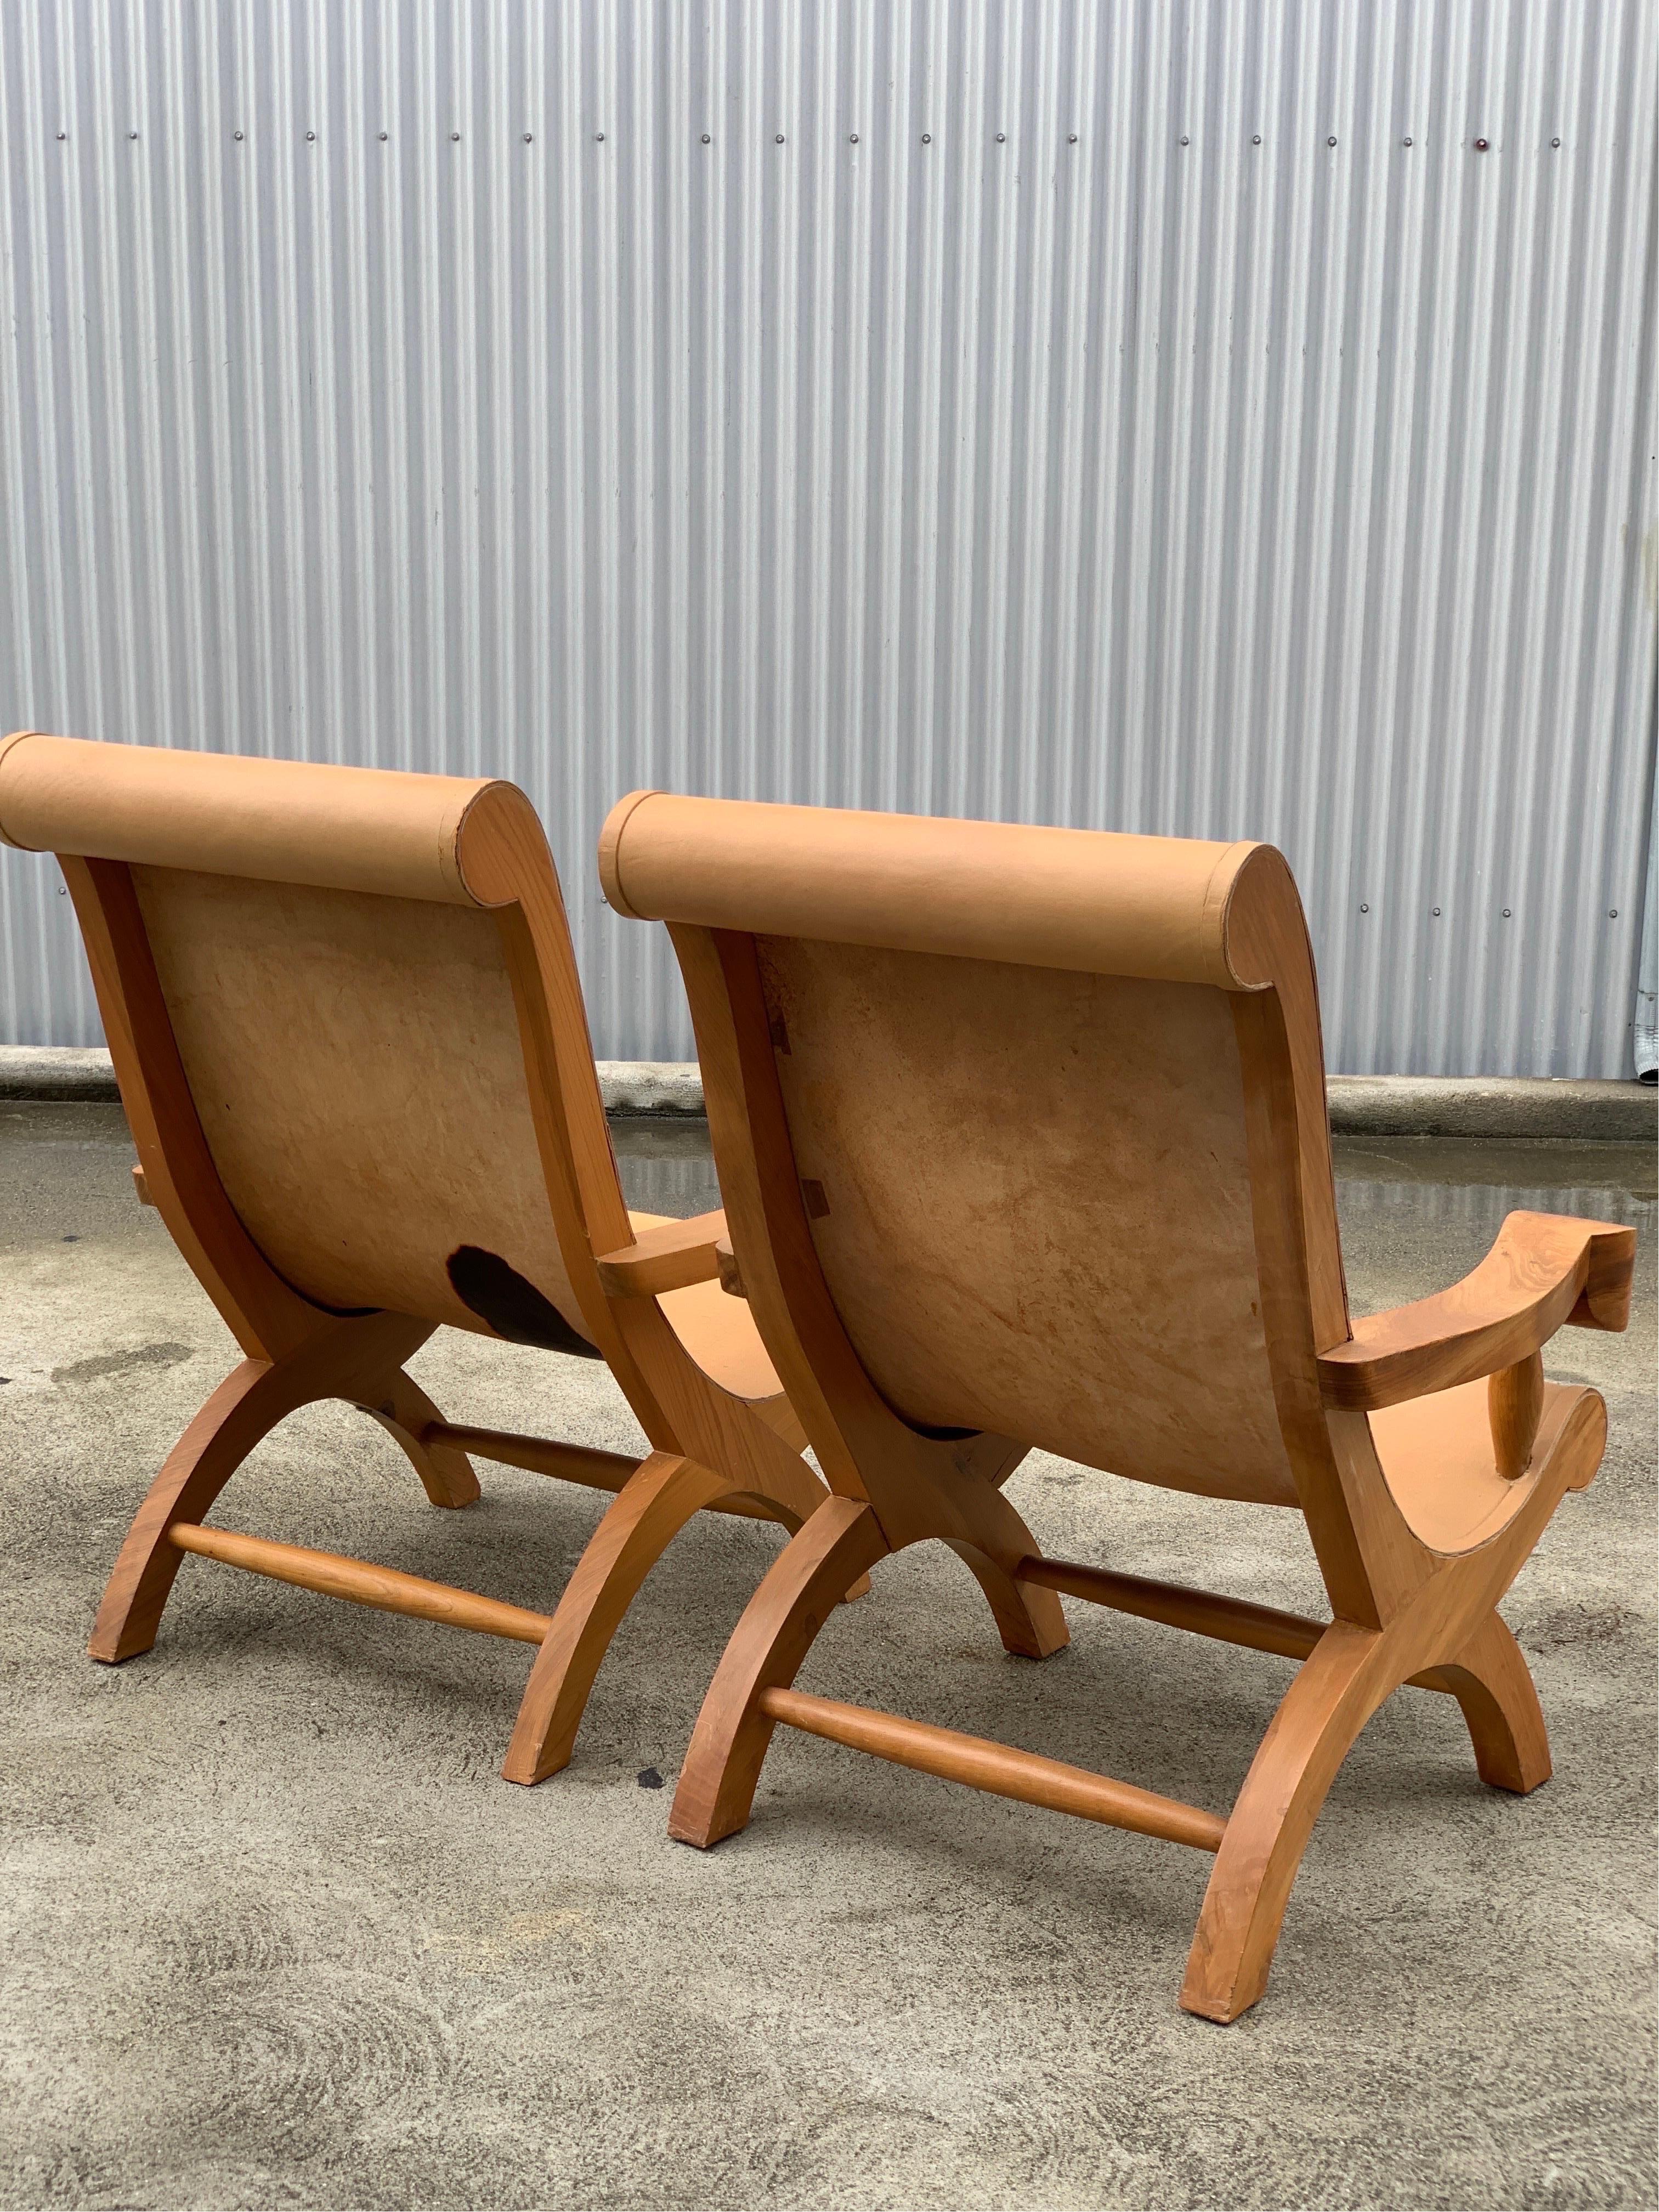 Pair of iconic arm lounge chairs by Clara Porset from an architect, really significant building designed by Ricardo Legarreta architect located in Emeryville, California.